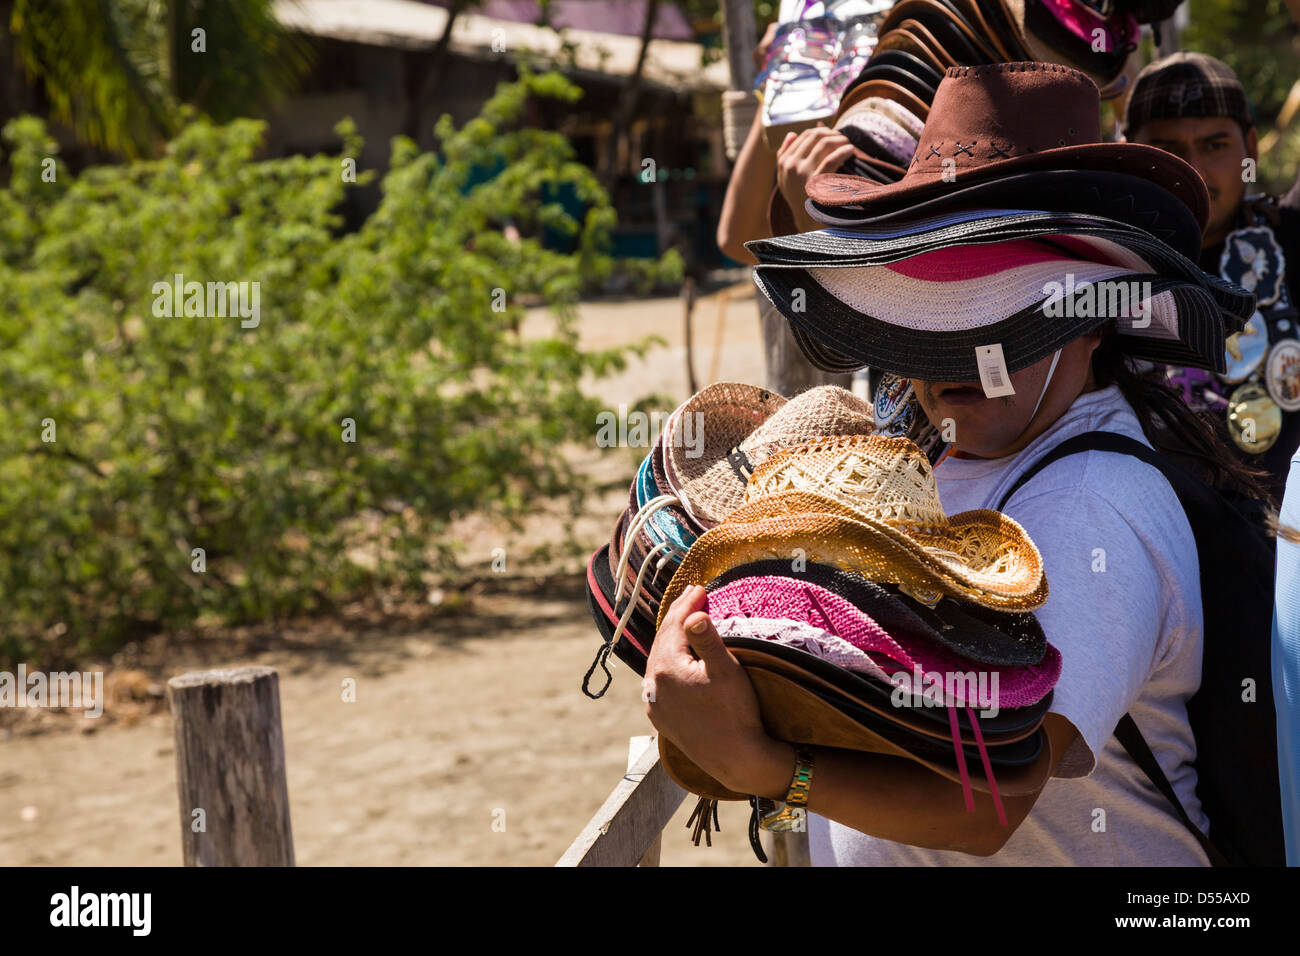 Vendor carrying a full load of hats at Coco Beach, Playas del Coco, Guanacaste, Costa Rica. Stock Photo